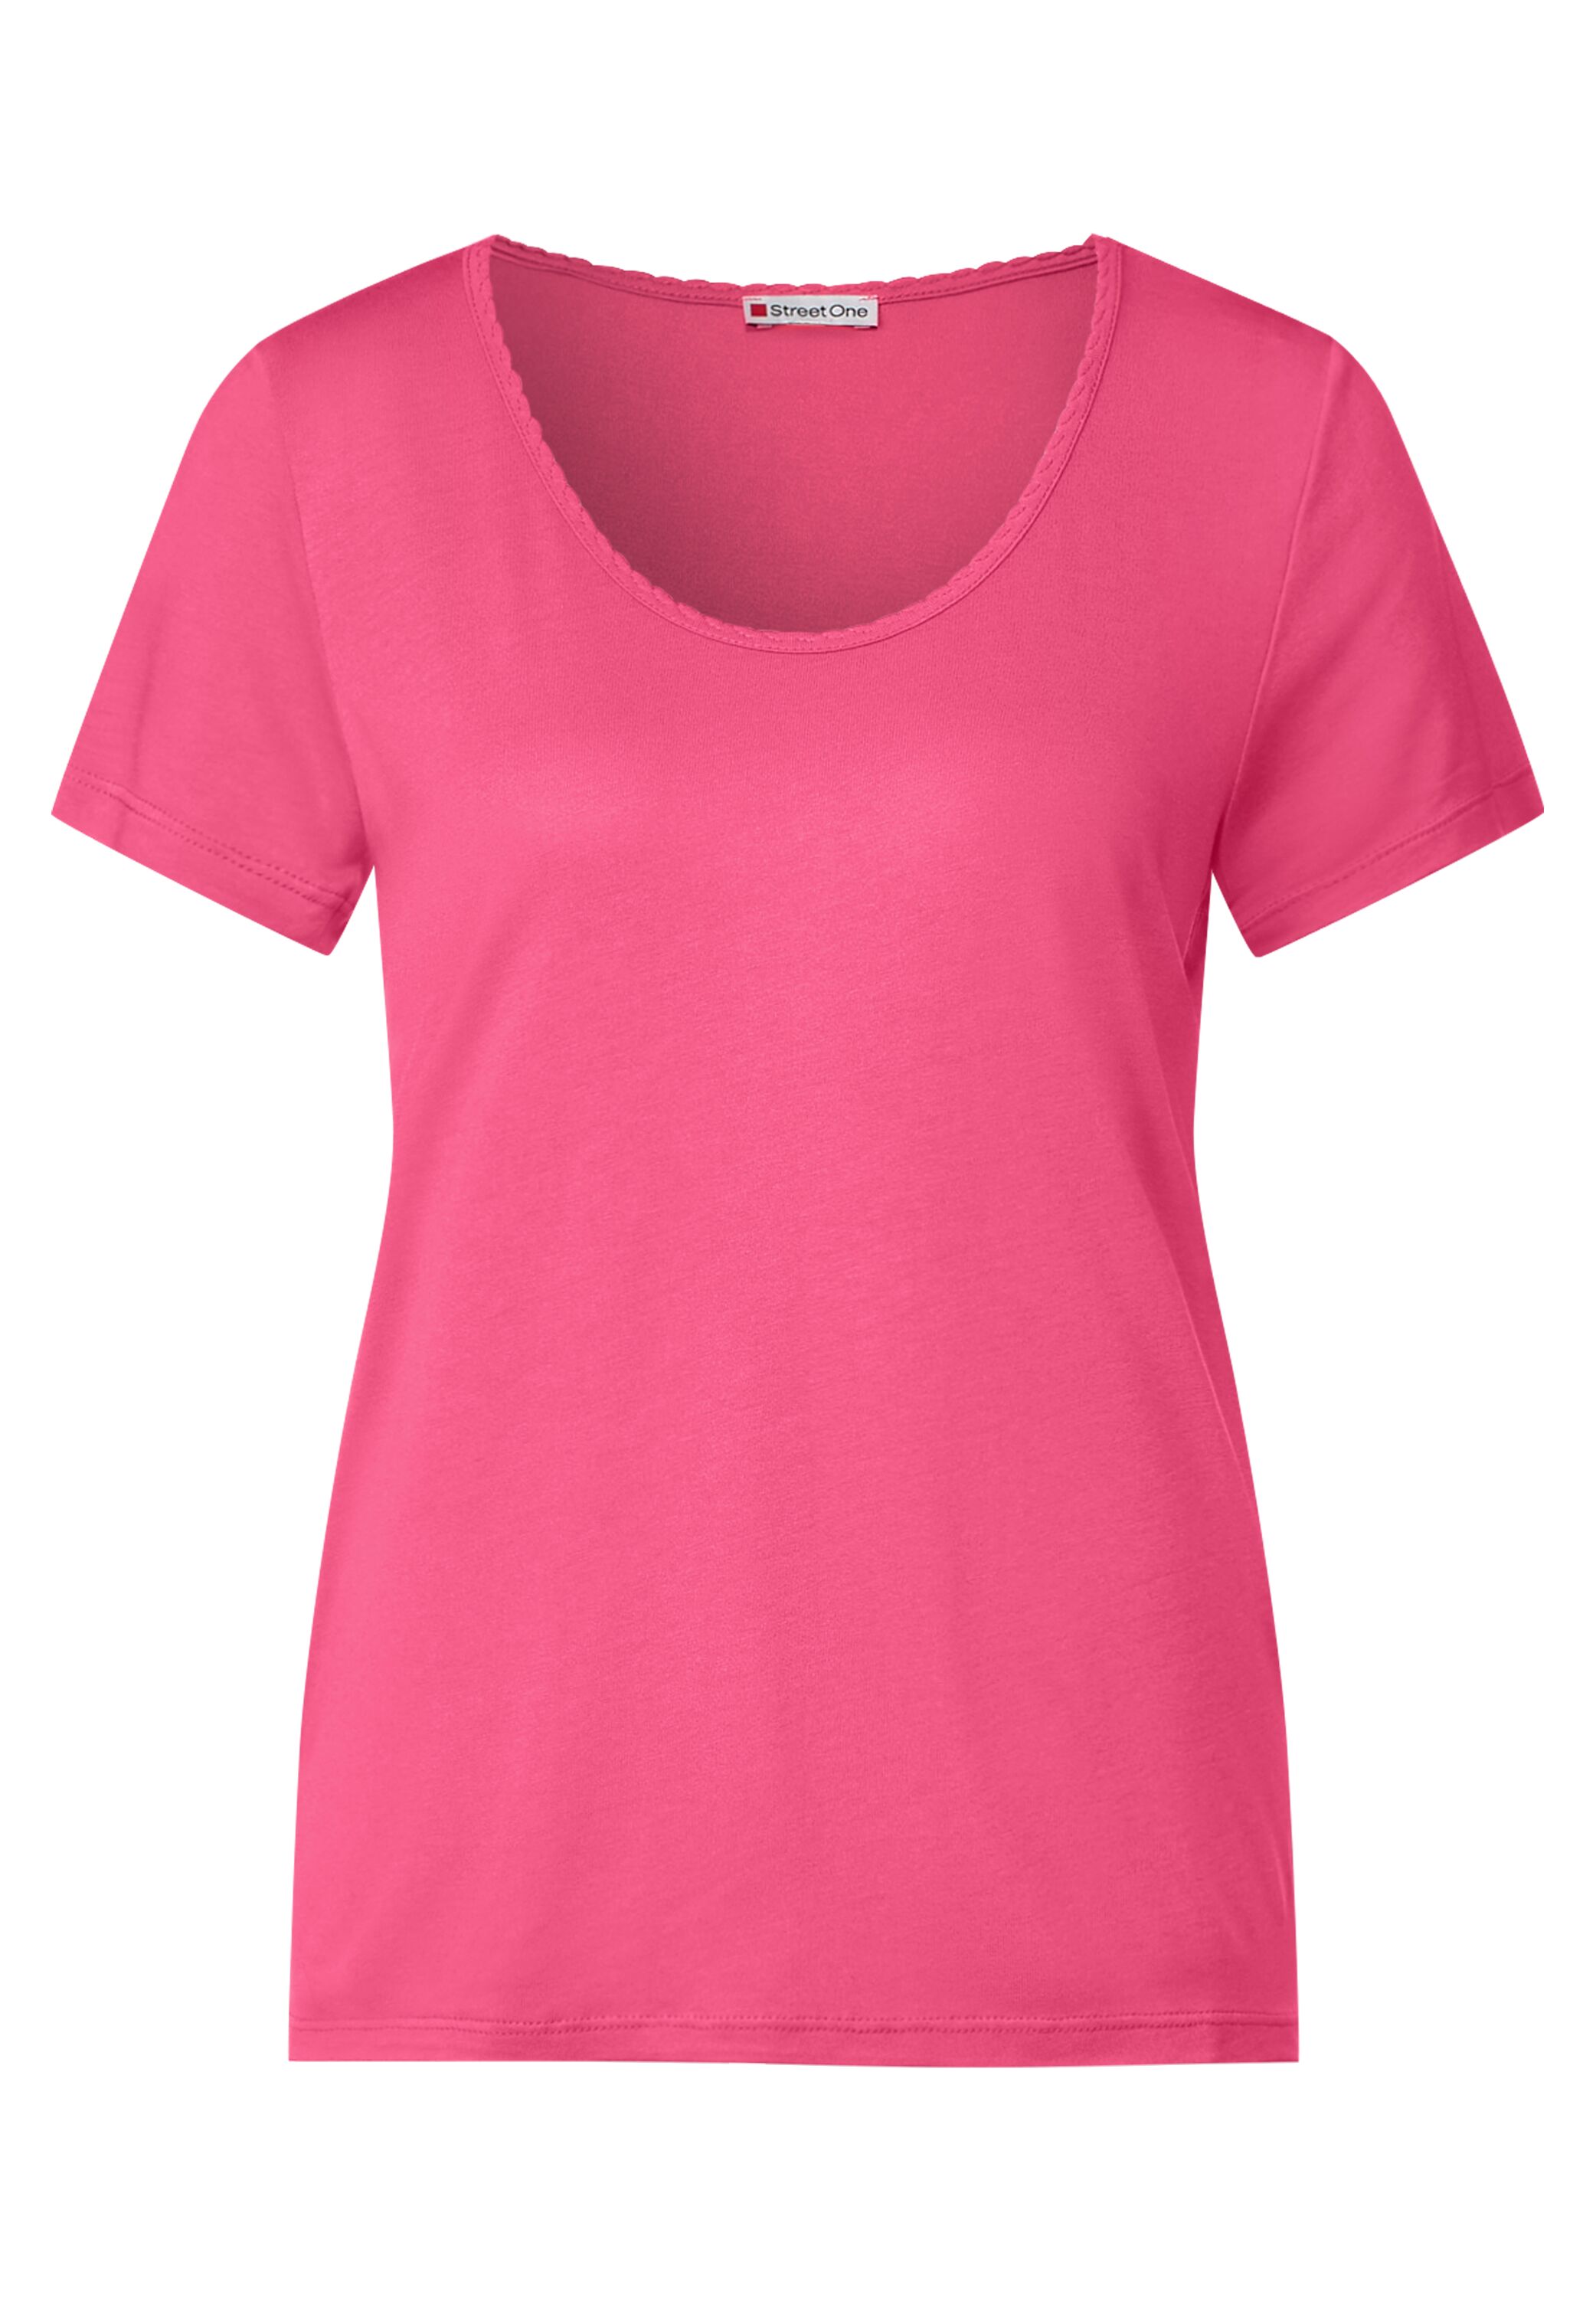 Street One Rose - SALE CONCEPT im Berry reduziert A320124-14647 in Mode T-Shirt